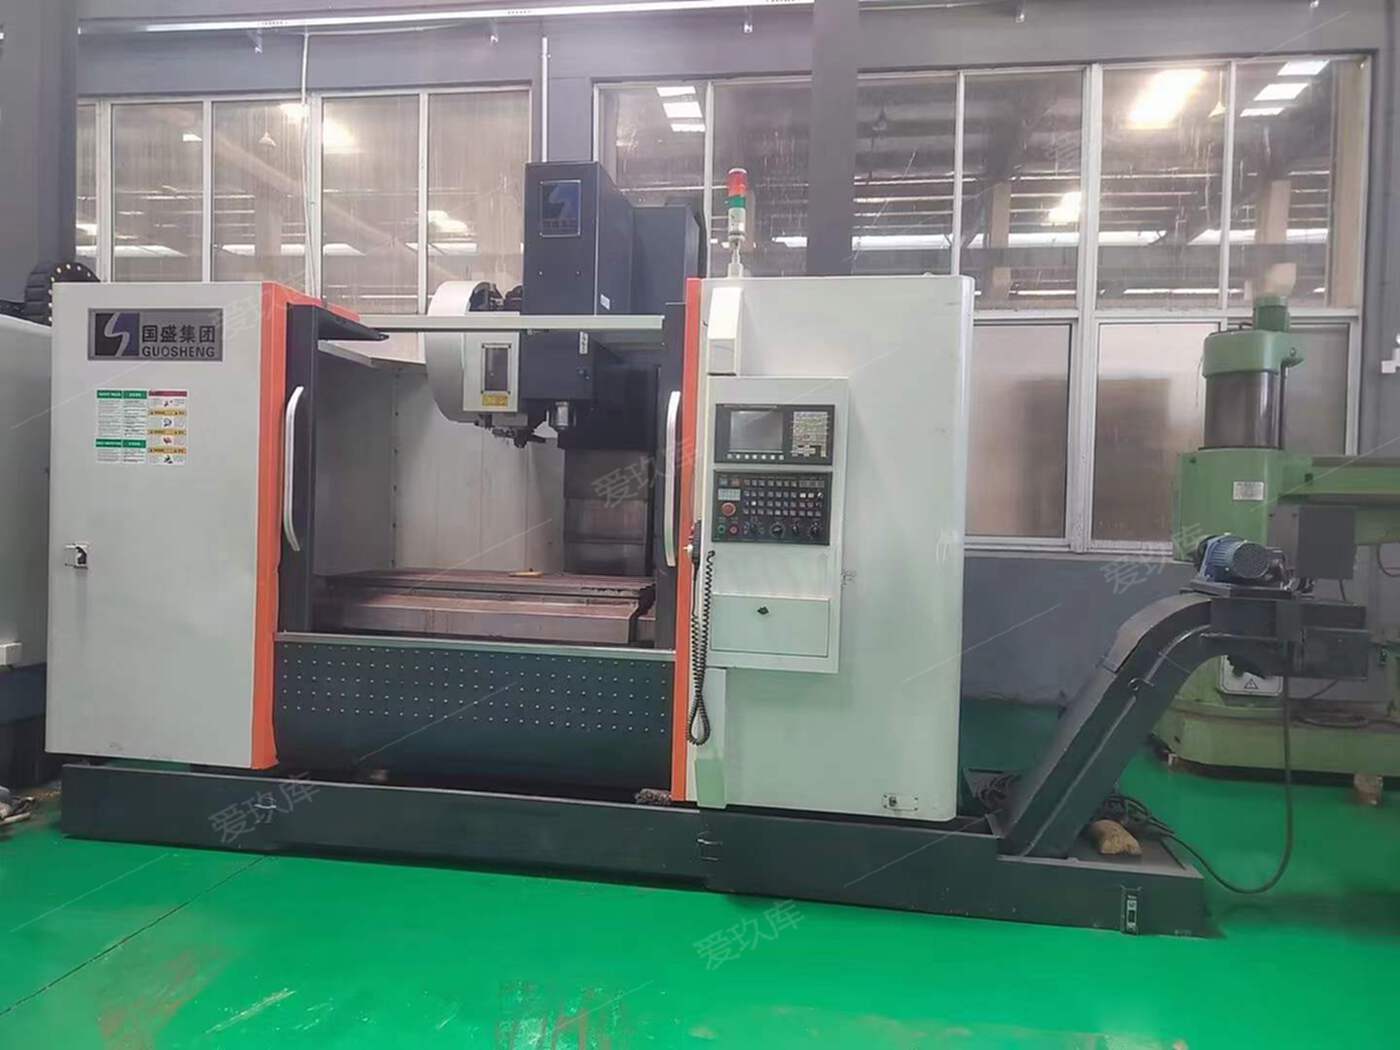 Sell guosheng 1370 processing center a